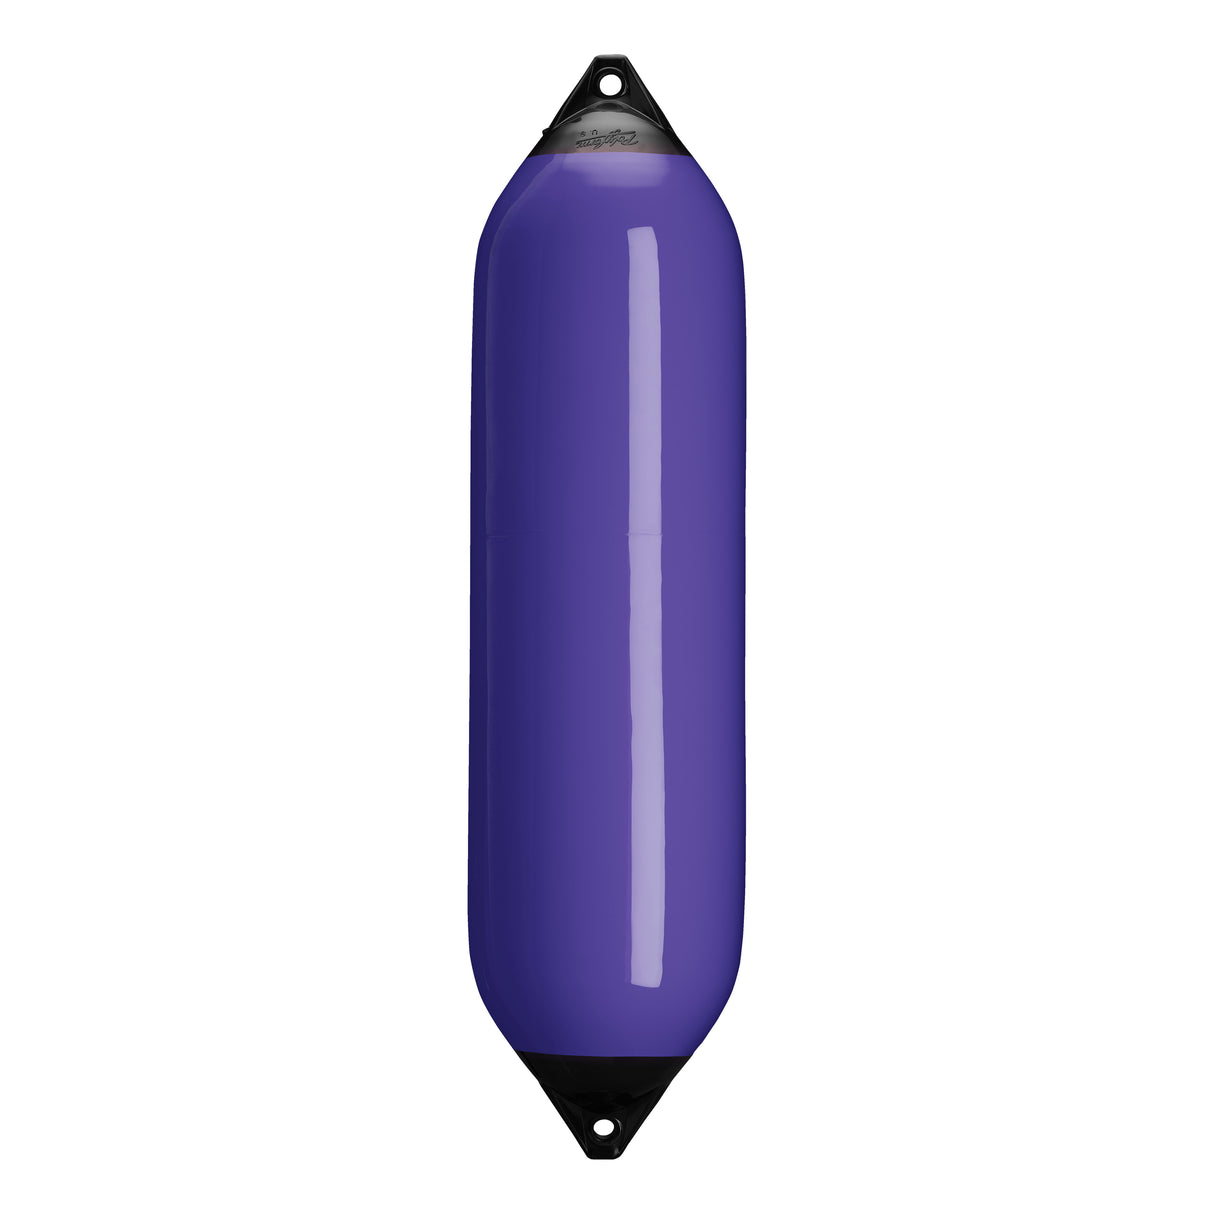 Purple boat fender with Navy-Top, Polyform F-8